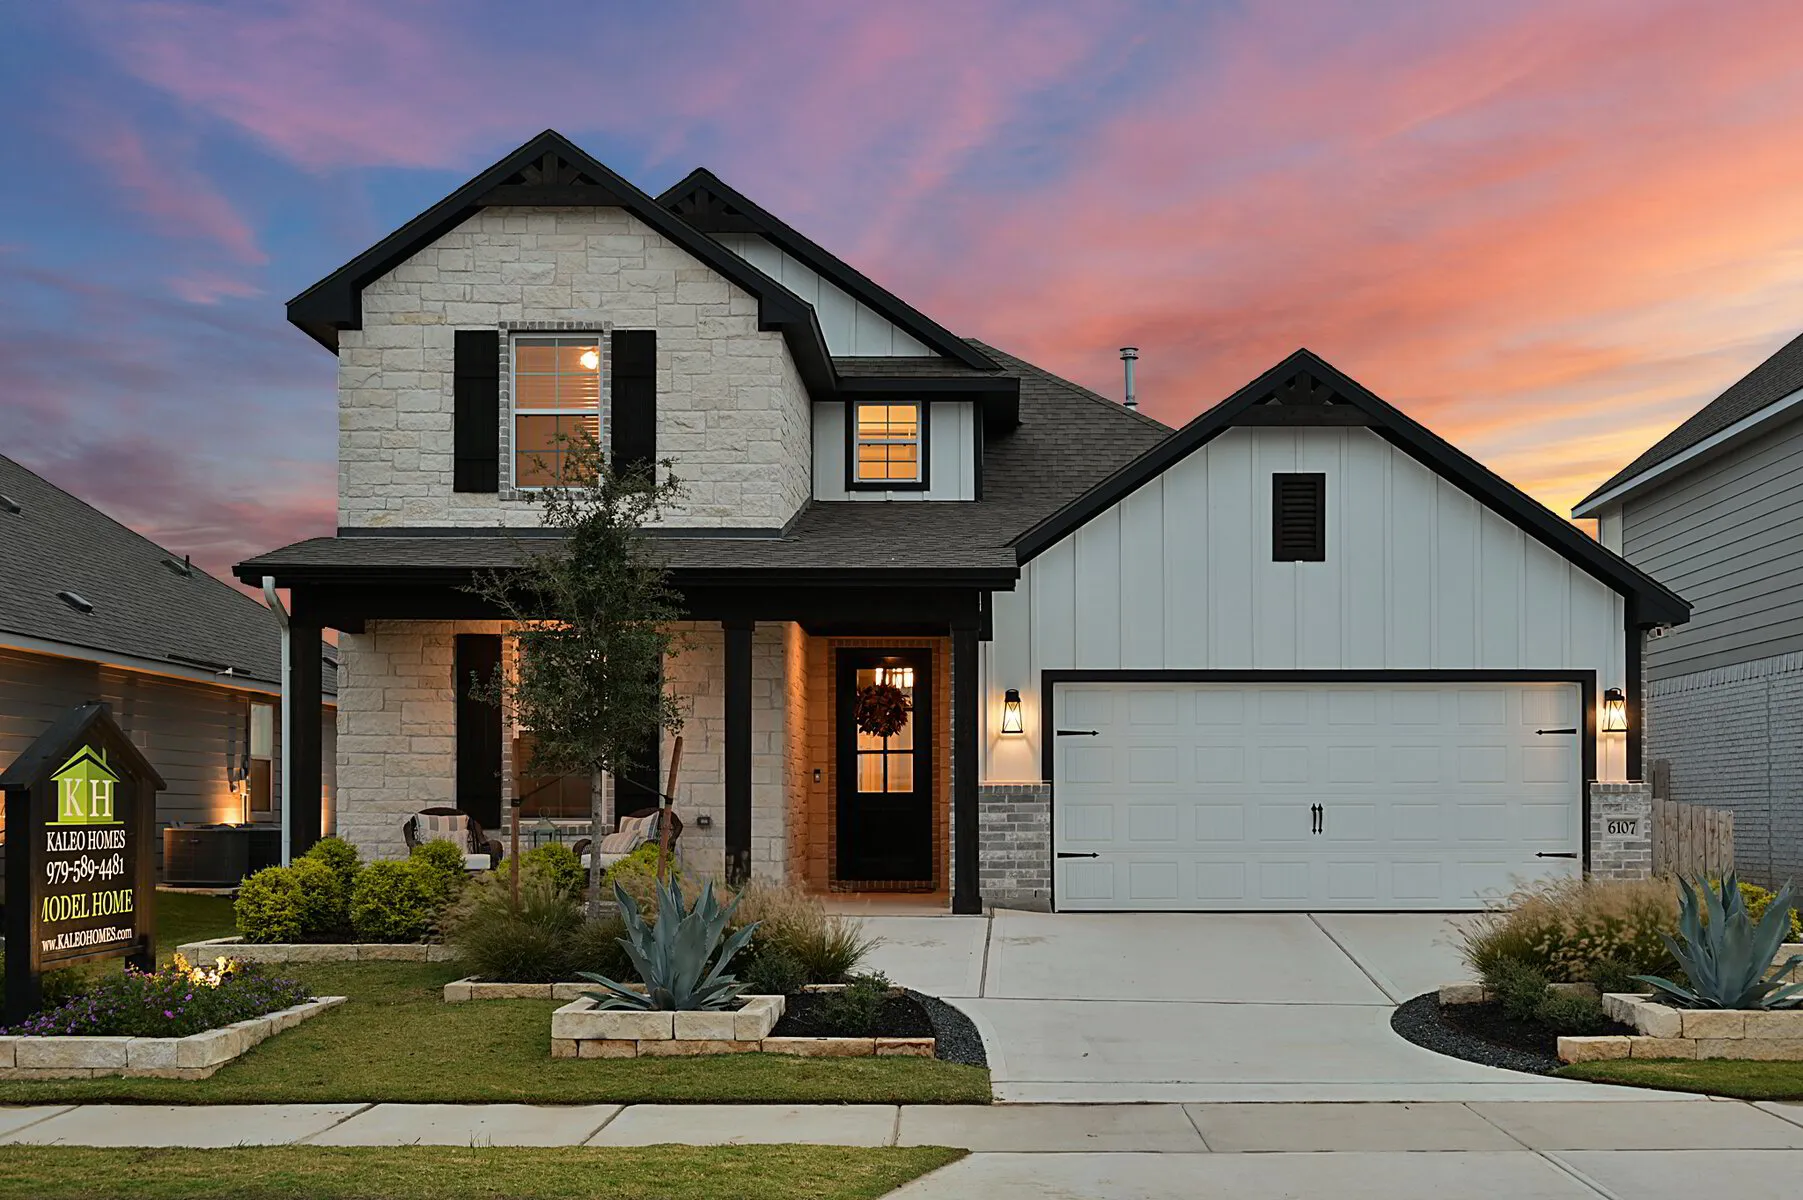 Experienced Home Builder Crafting Your Dream Home